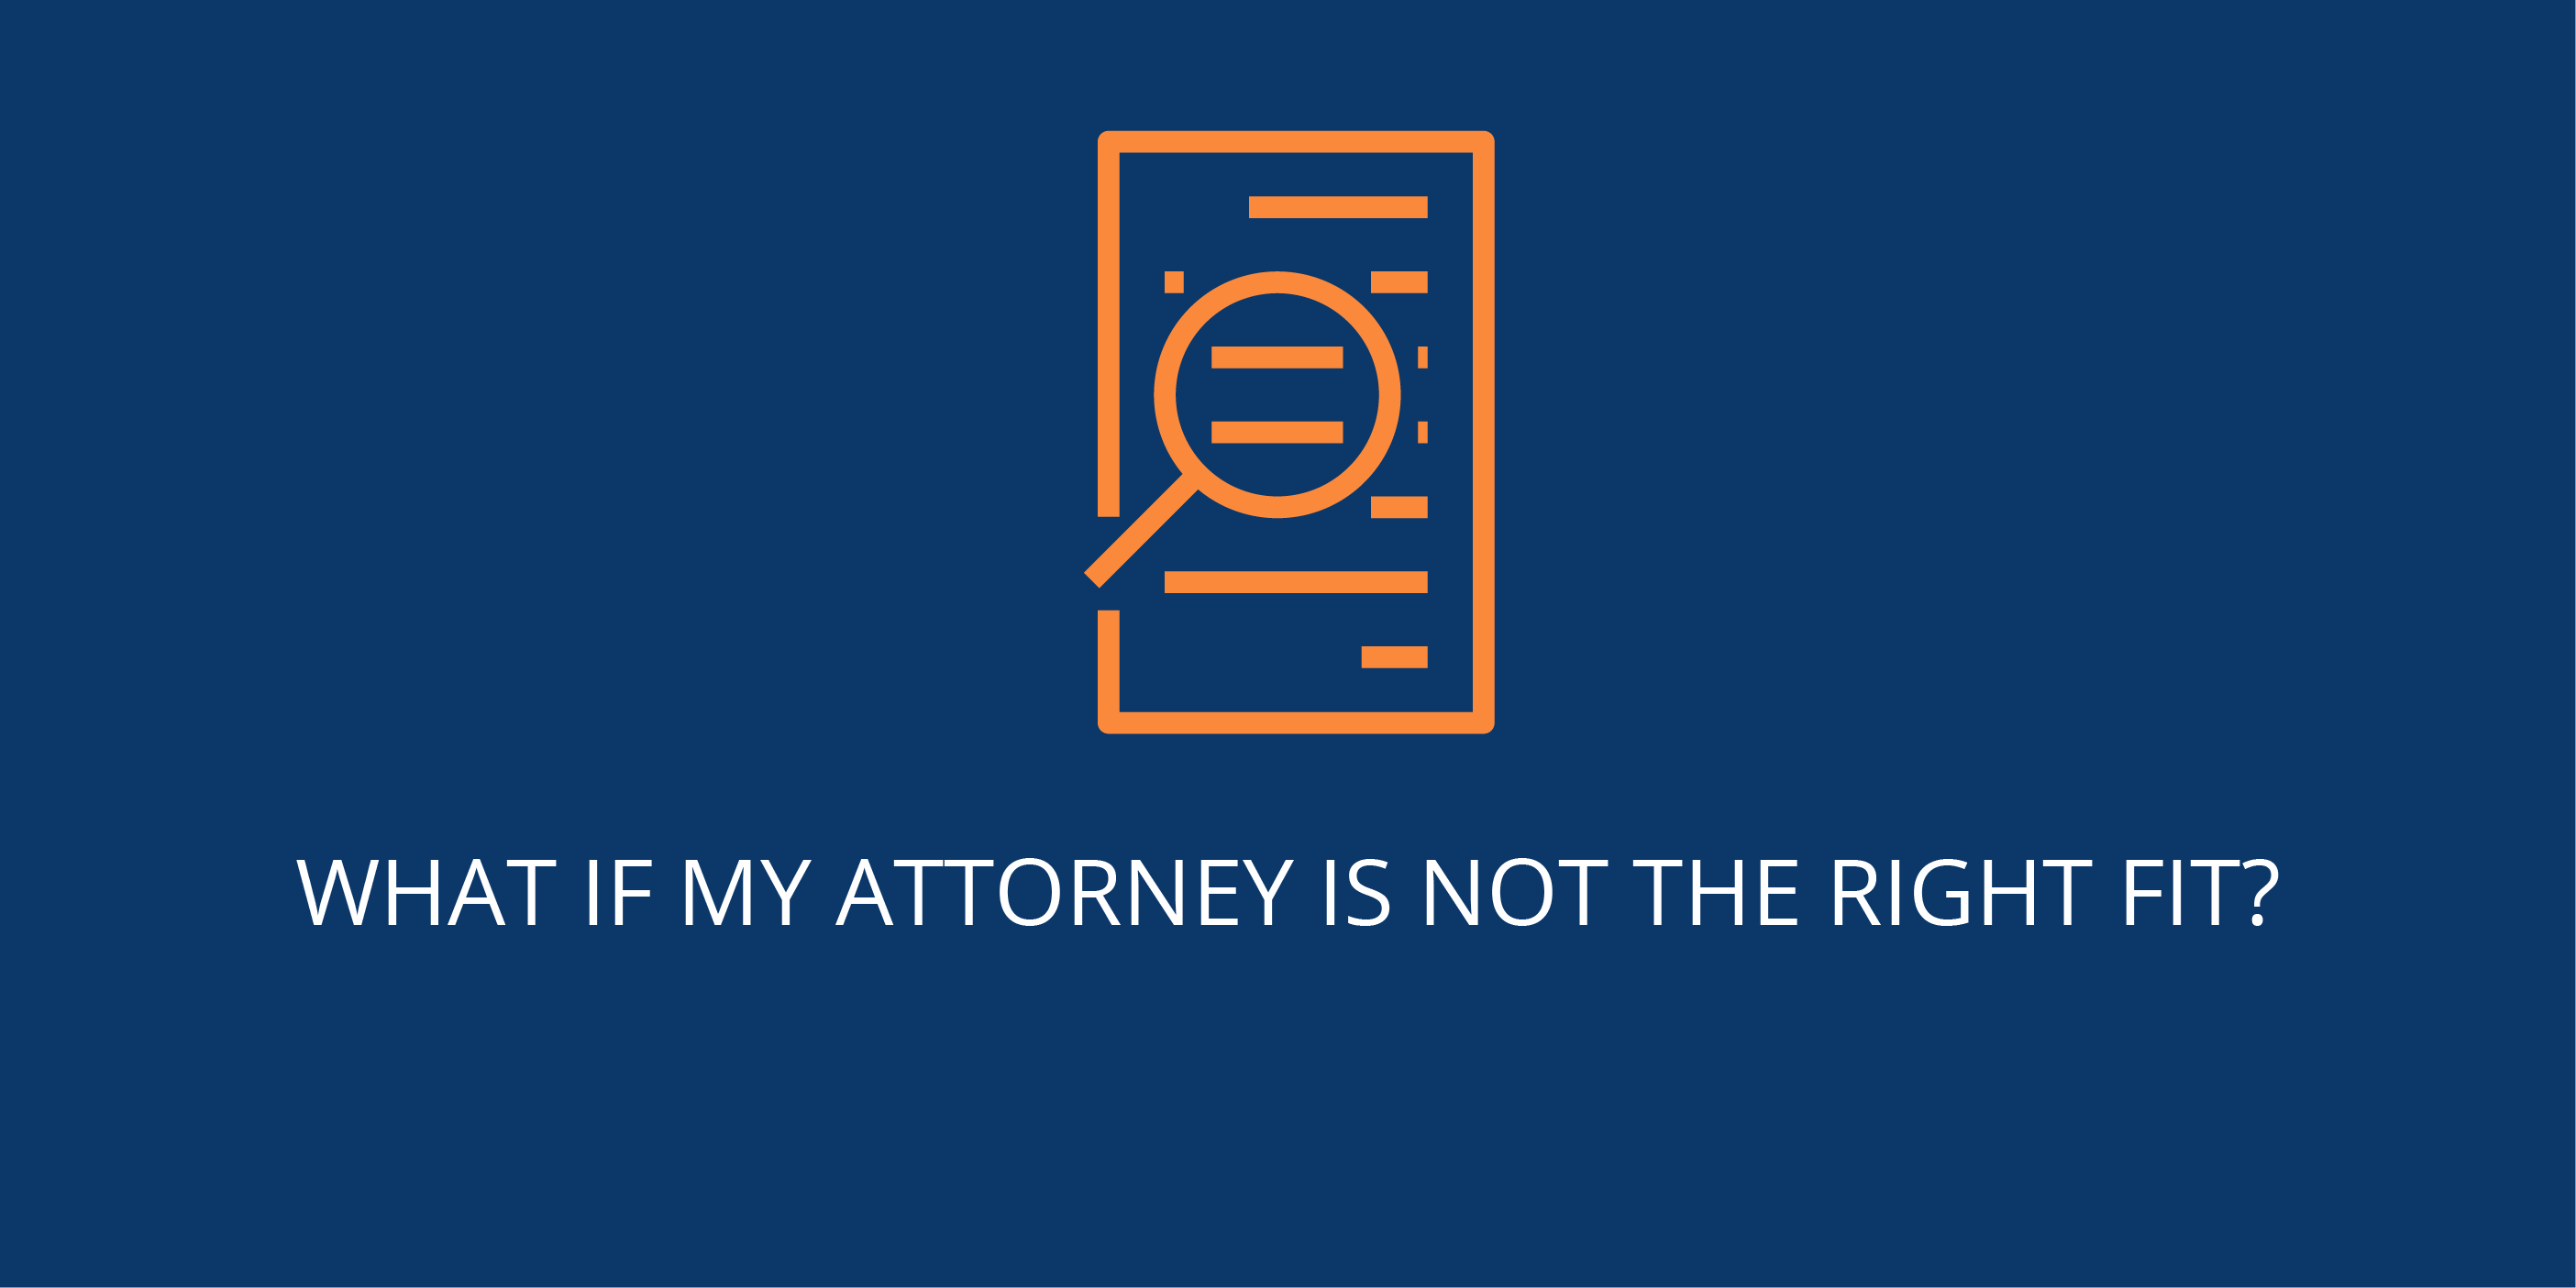 What if my attorney is not the right fit?